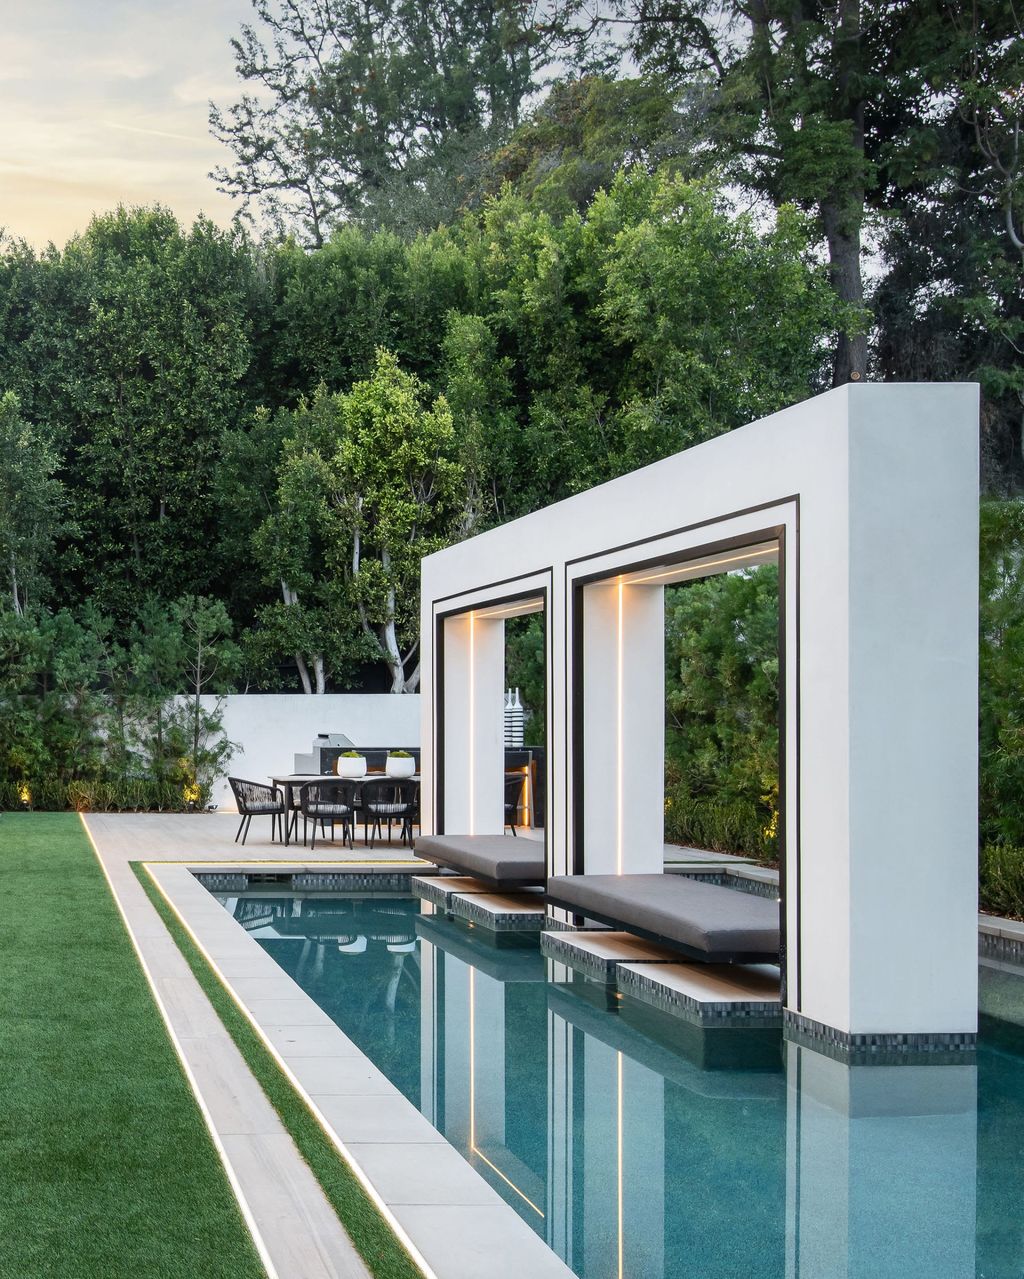 Brand-New-Modern-Home-on-one-of-the-most-Prestigious-Streets-in-Beverly-Hills-hits-Market-for-26900000-2